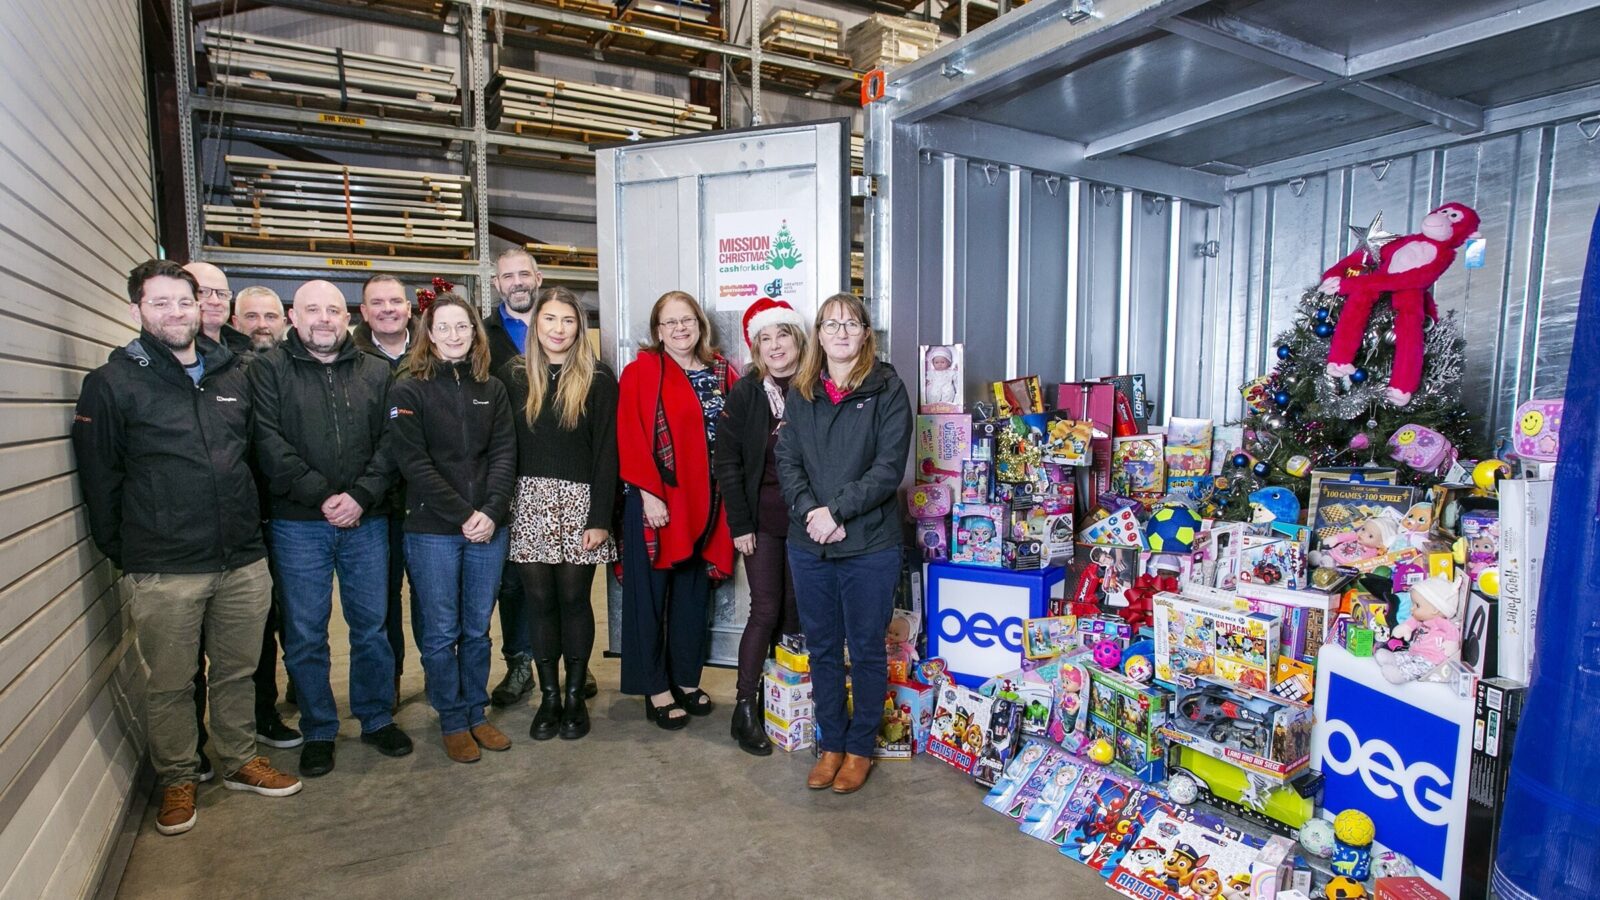 OEG Offshore’s team with the Mission Christmas toy container